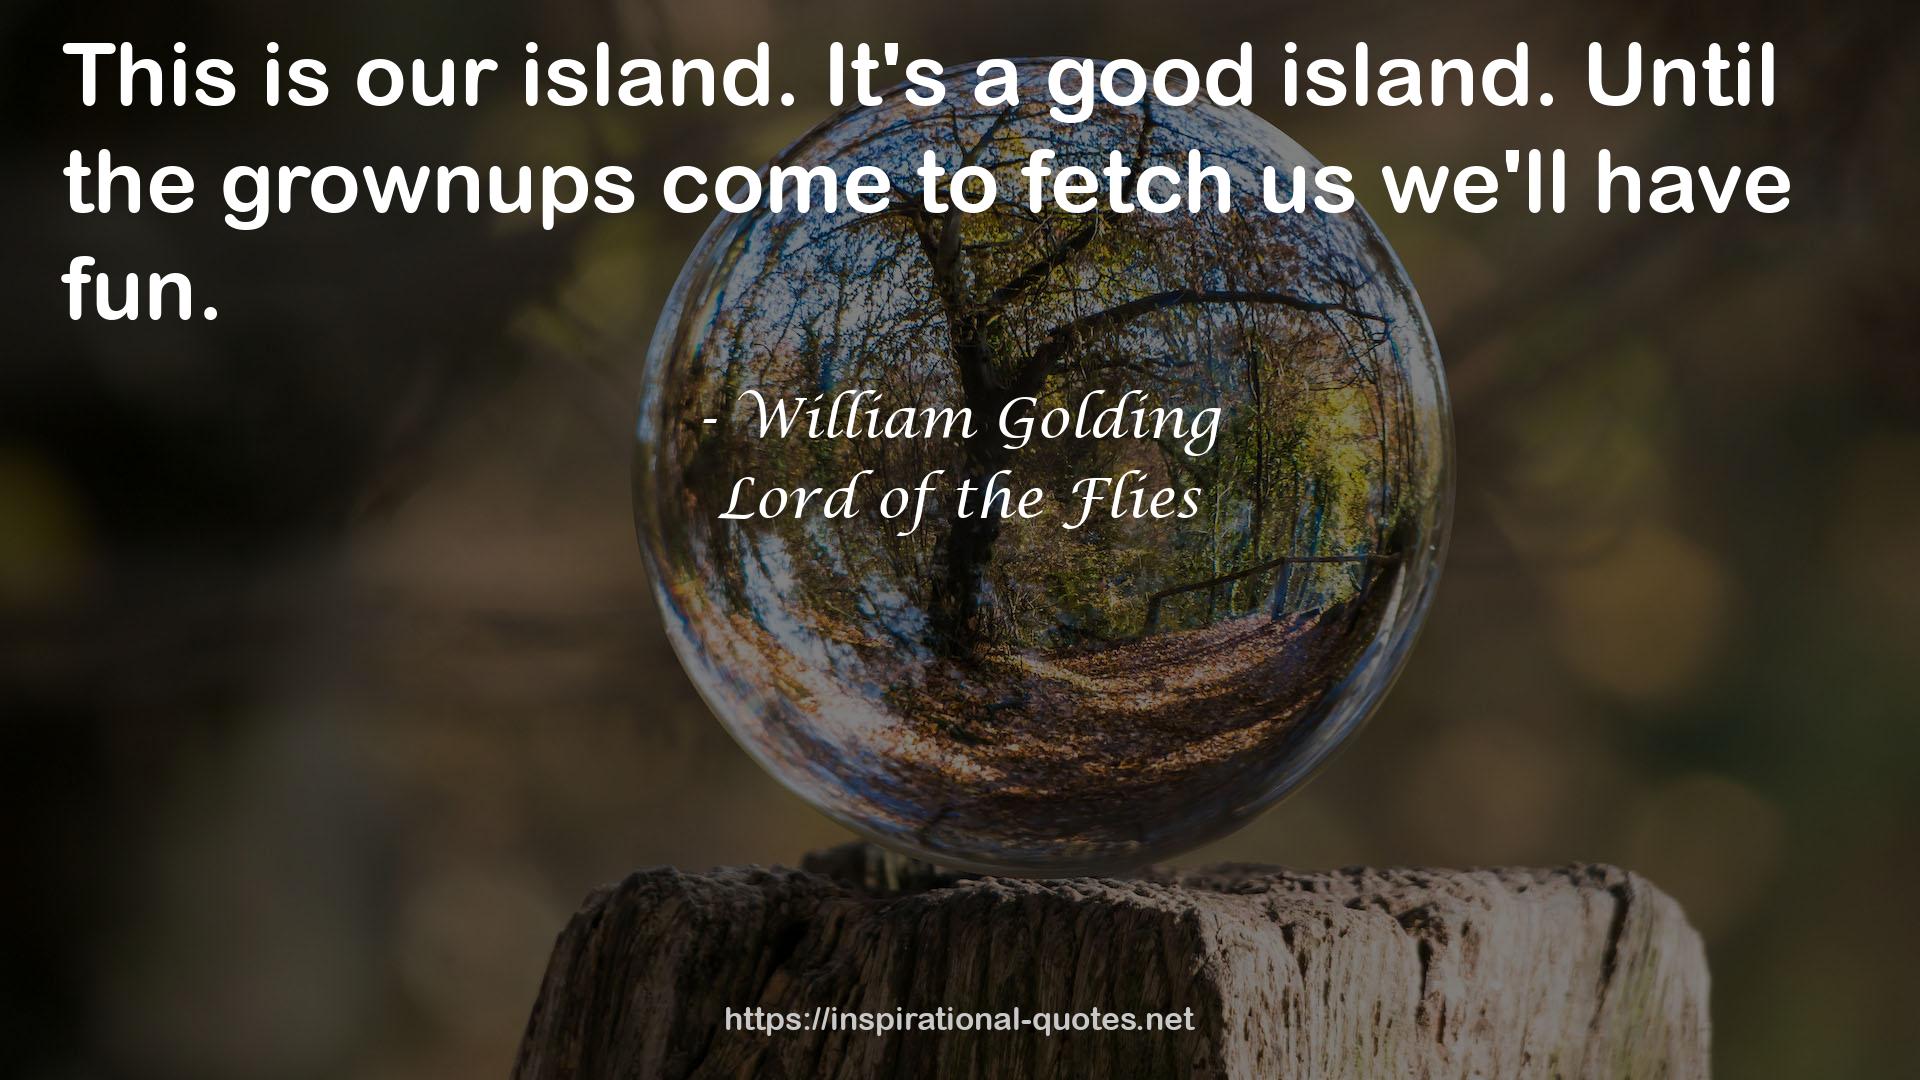 Lord of the Flies QUOTES